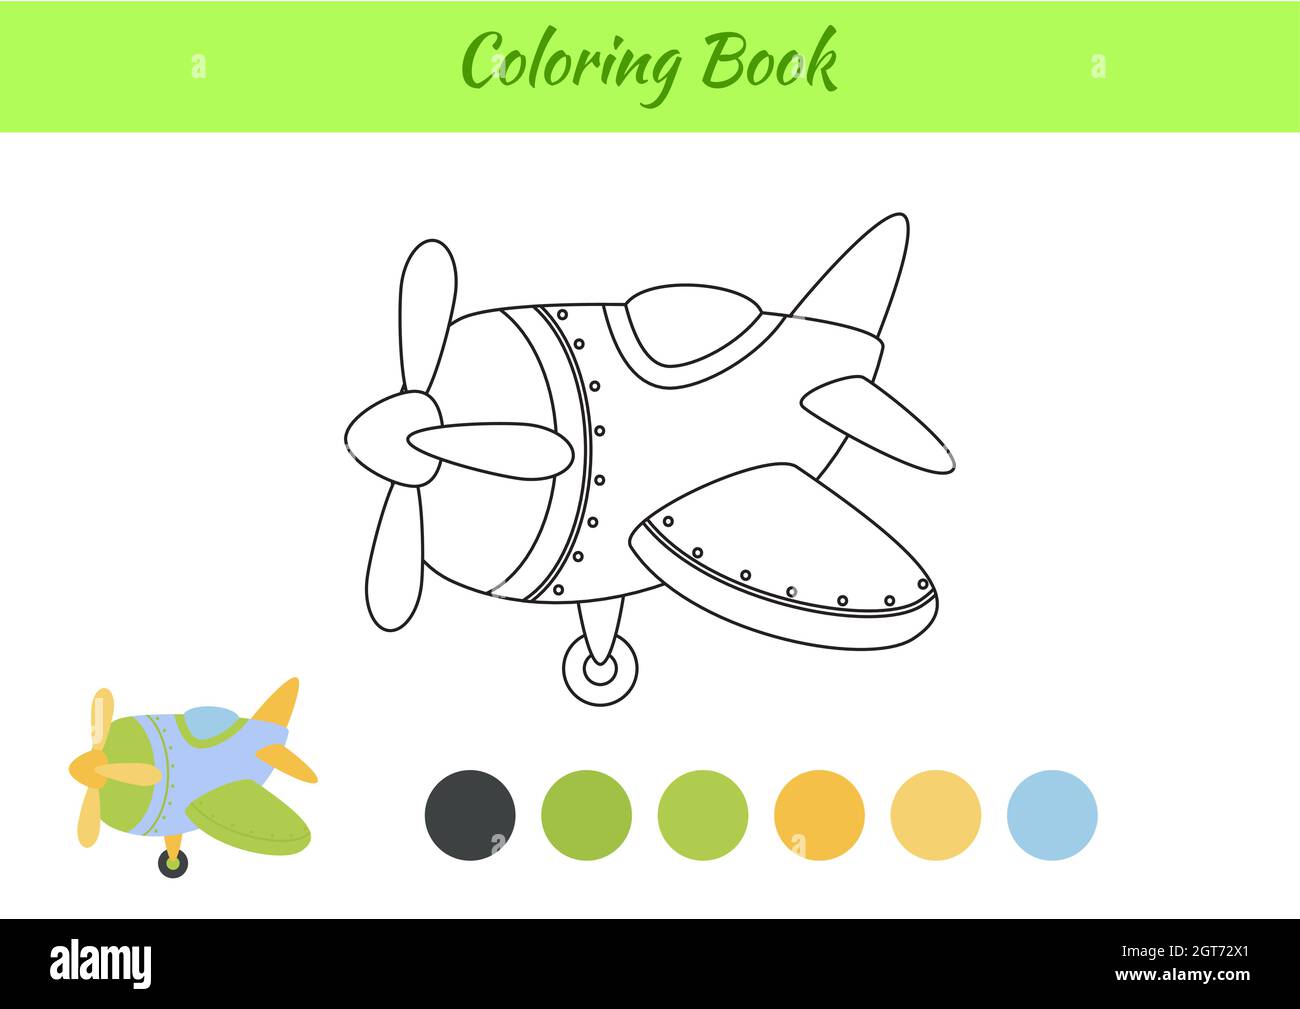 Coloring book airplane for children. Educational activity page for ...